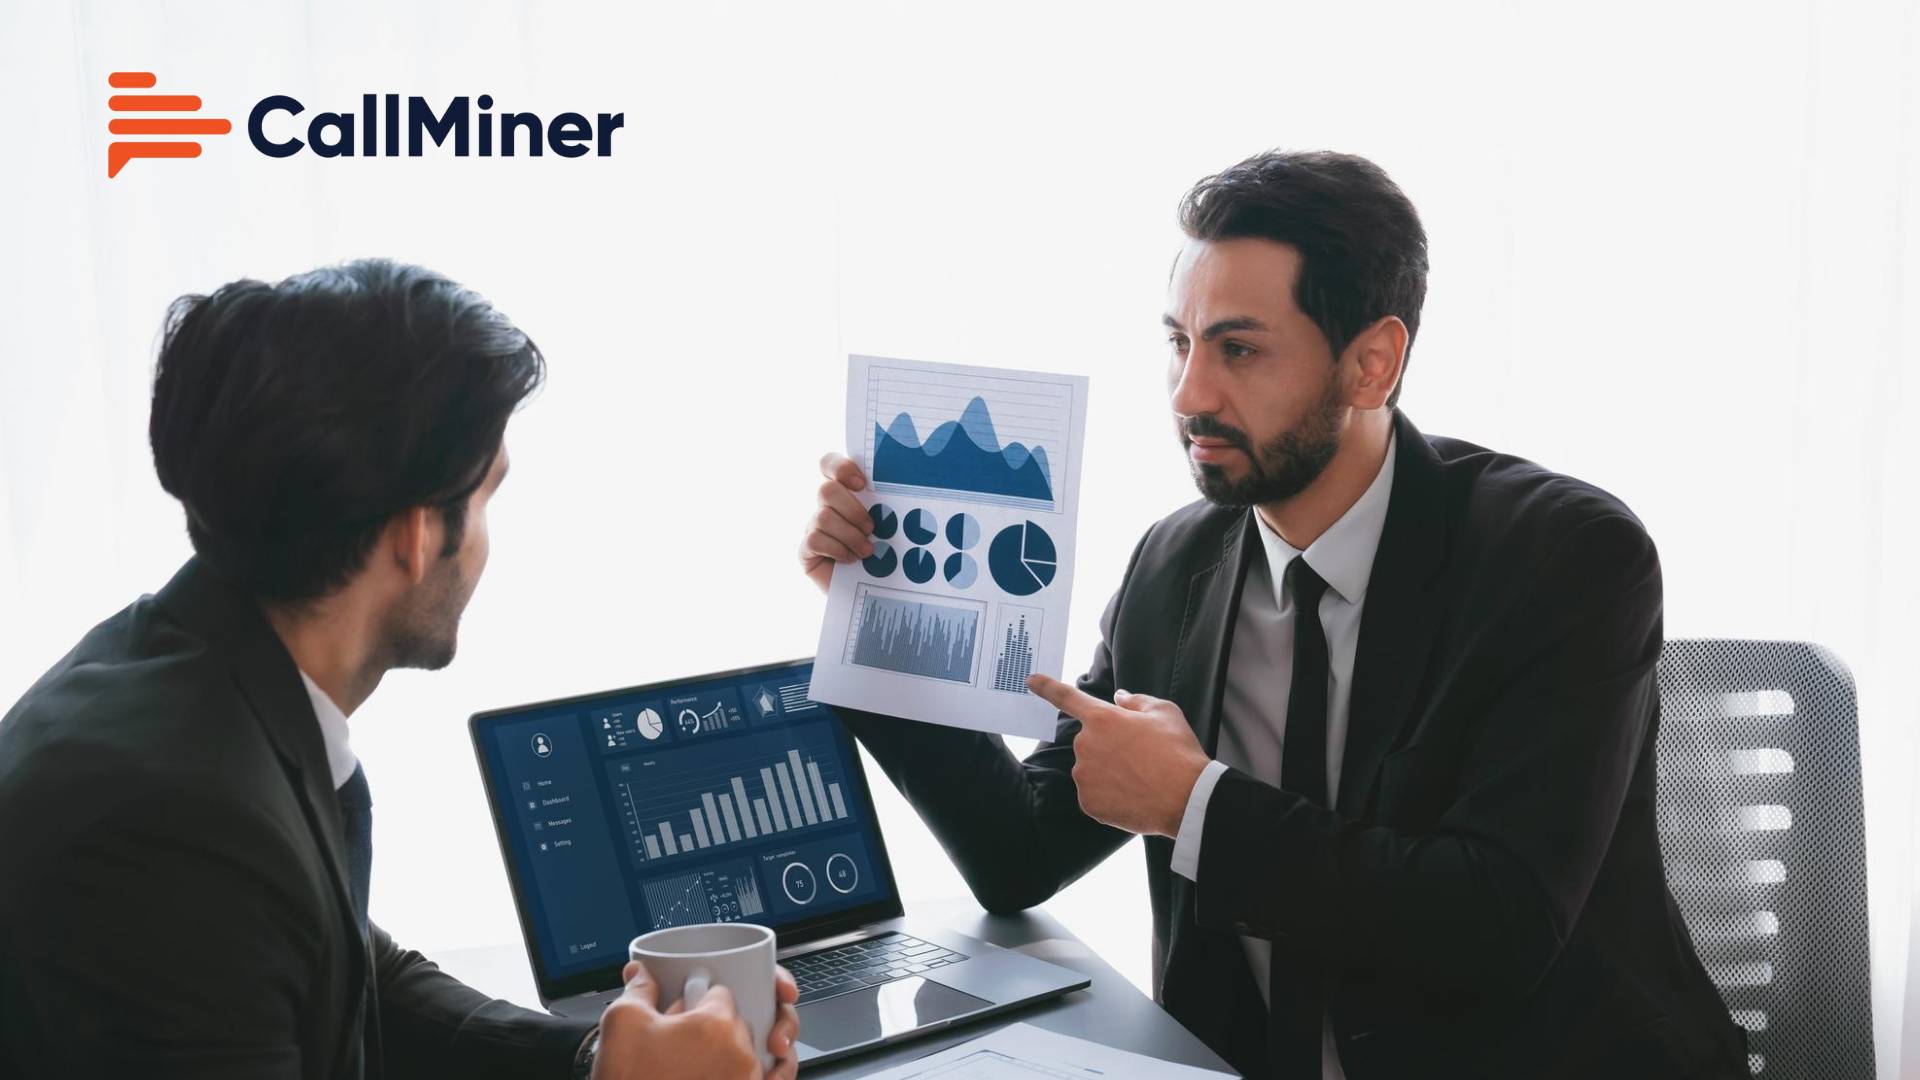 CallMiner Unveils the CallMiner App Marketplace: A One-Stop Destination for Conversation Intelligence Solutions and Services